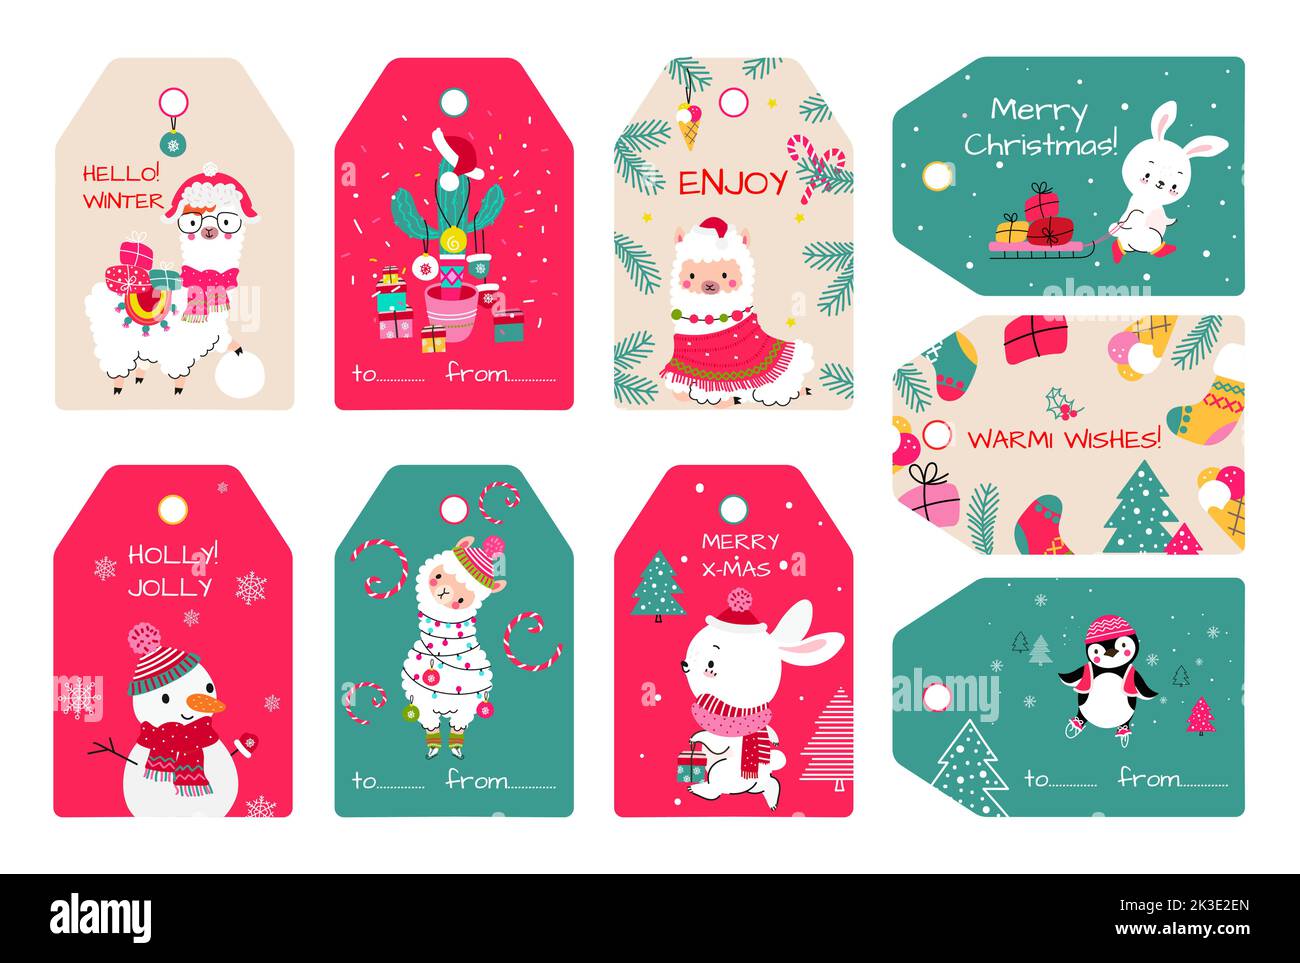 Christmas holiday tags with snowman, xmas llama and gifts. Winter stickers, present box labels for decor. New year nowaday decorative vector positive Stock Vector